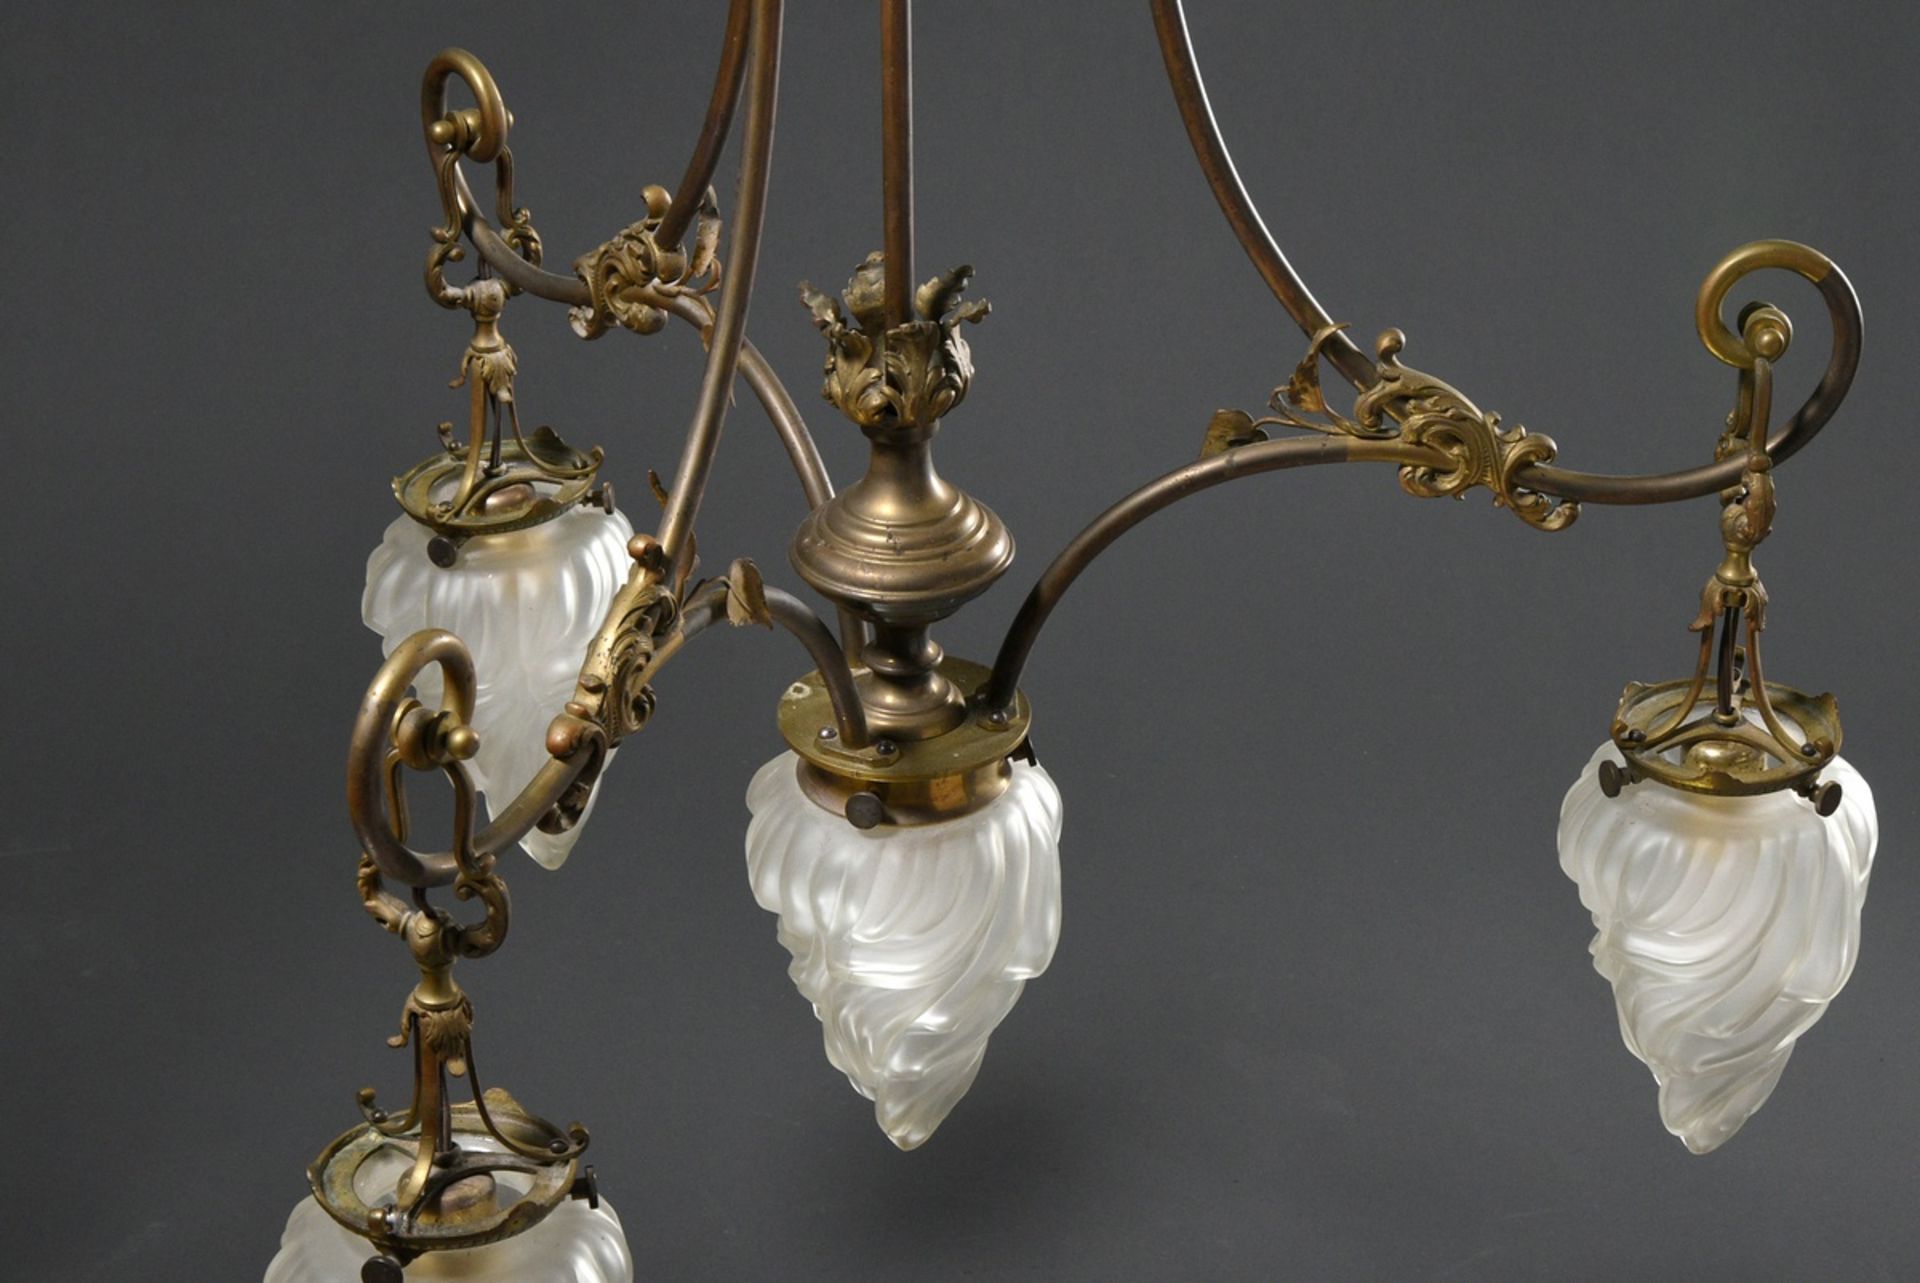 Wilhelminian period ceiling lamp with 4 frosted "flames" glass domes on brass frame with floral dec - Image 4 of 12